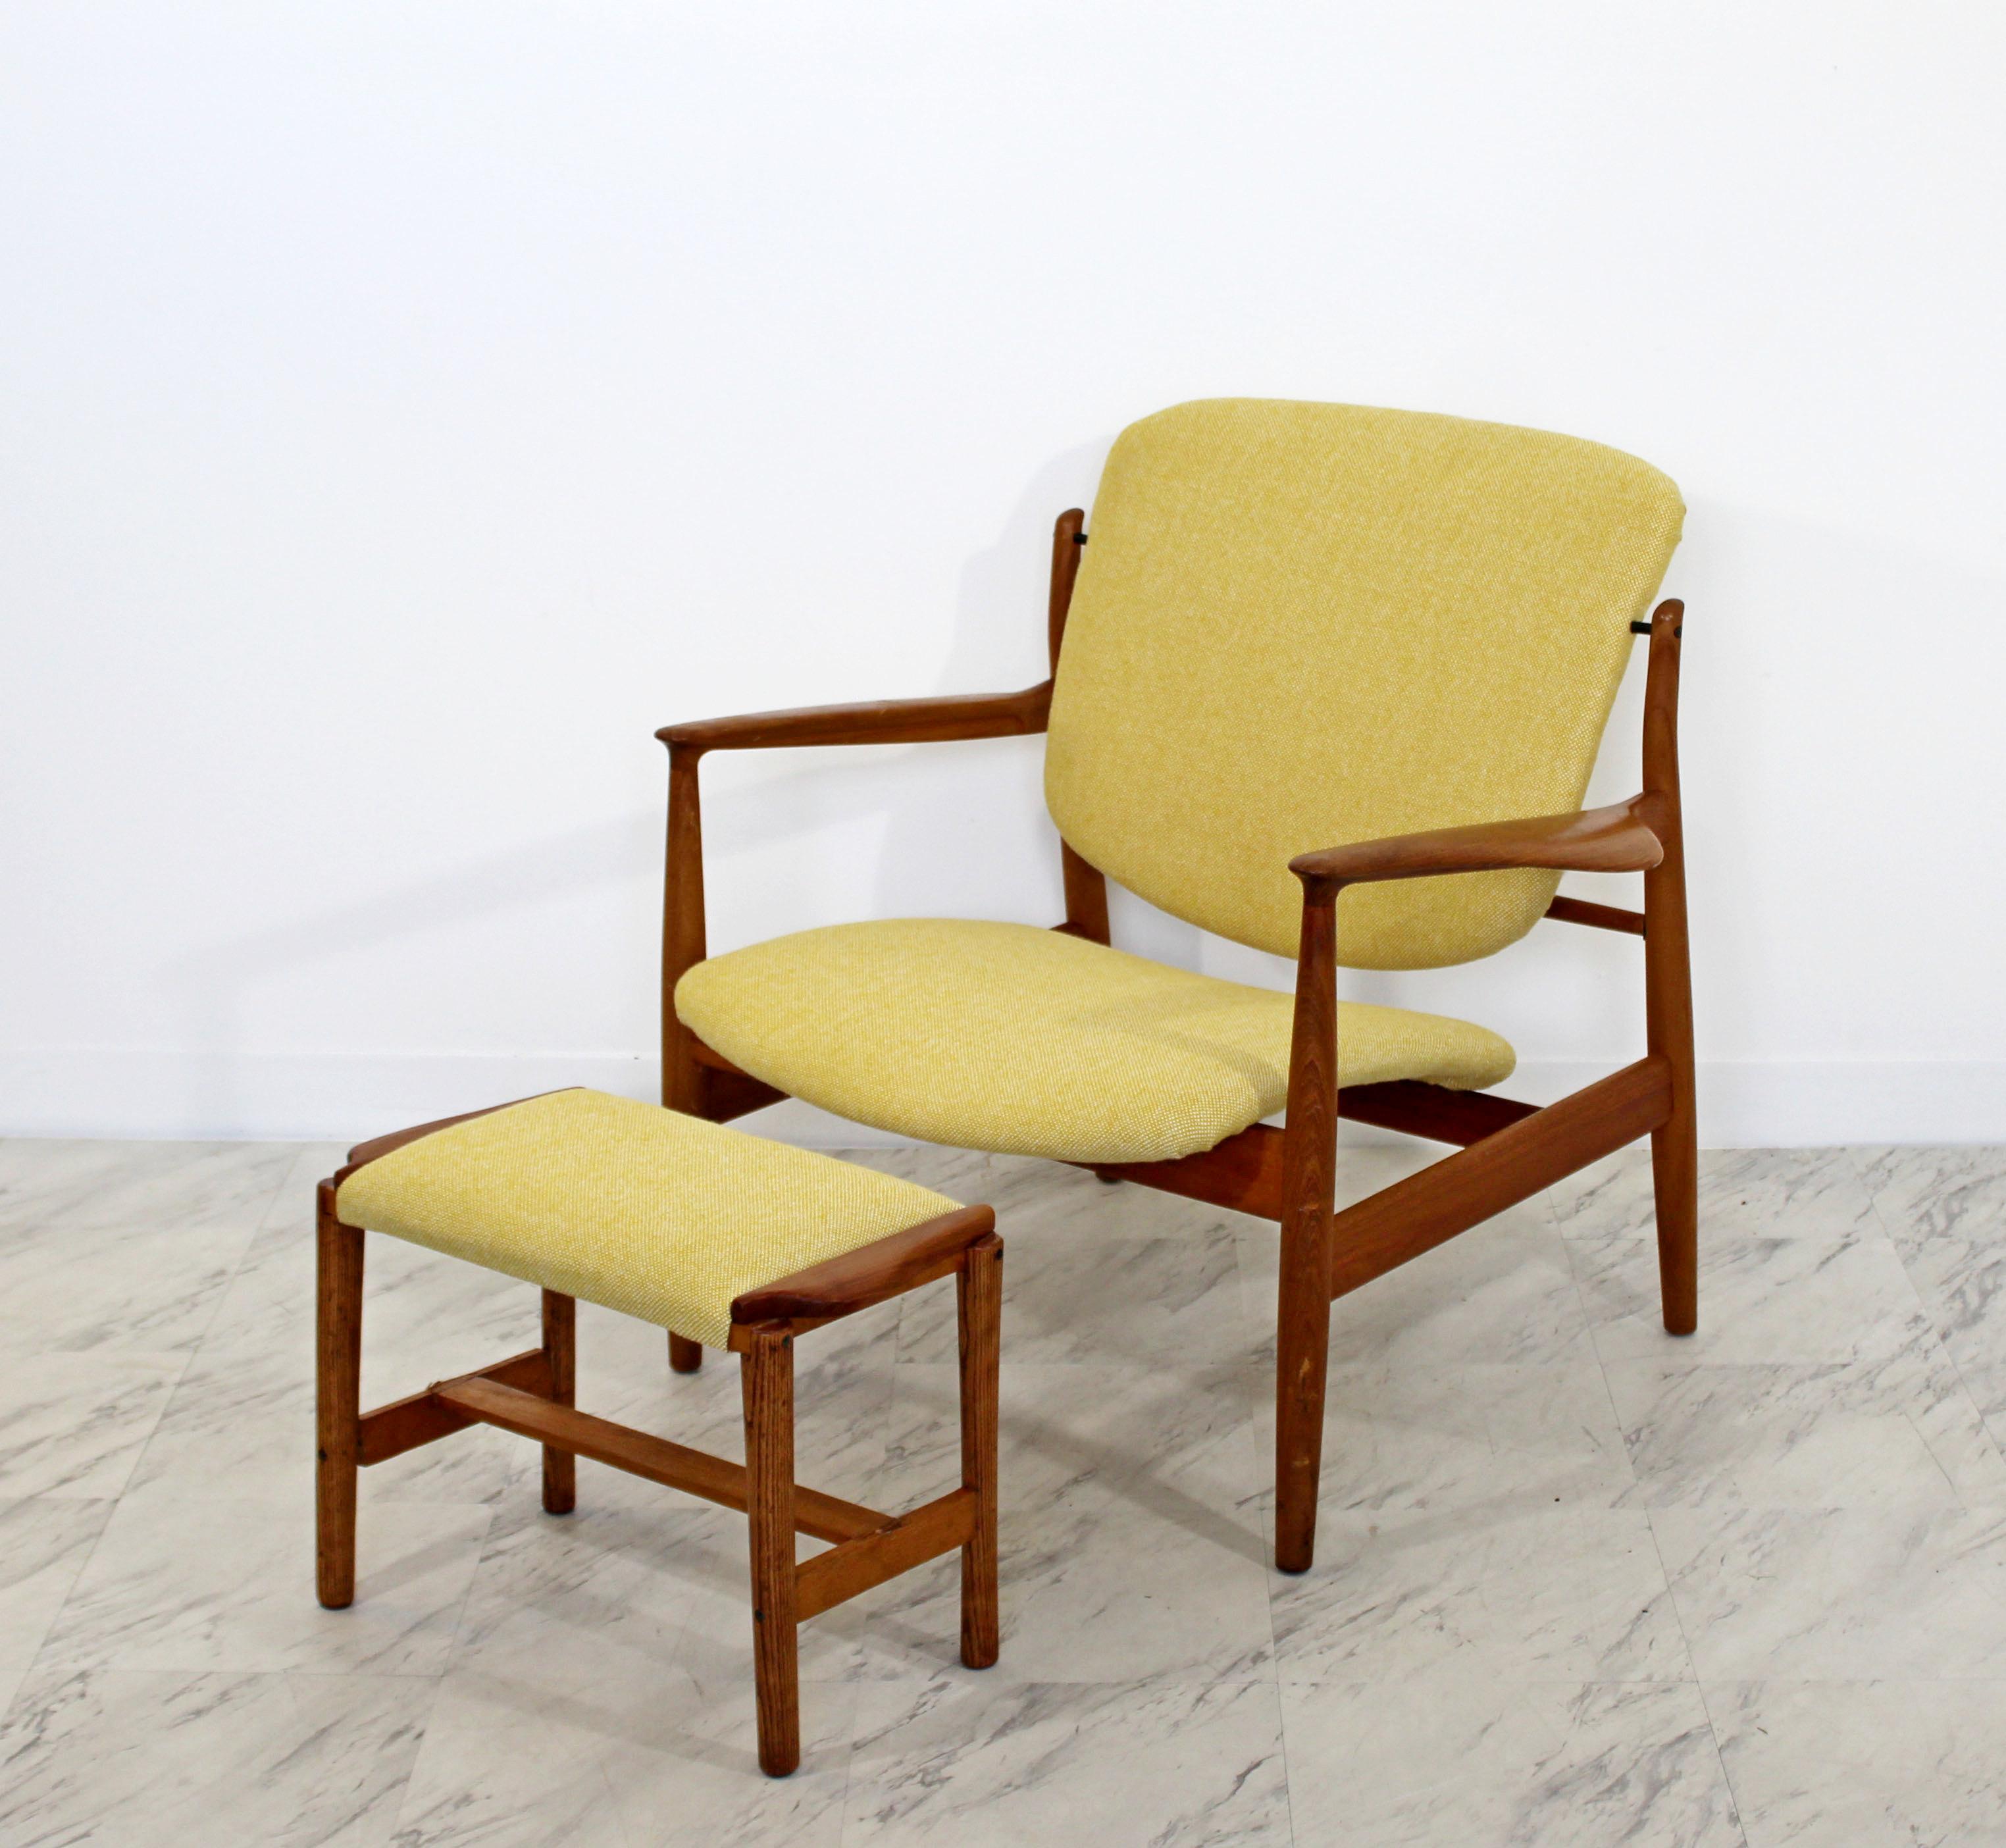 For your consideration are a magnificent, Danish teak armchair and ottoman, newly reupholstered in vintage fabric, by Finn Juhl for John Stuart, circa the 1950s. In very good condition. The dimensions of the chair are 32